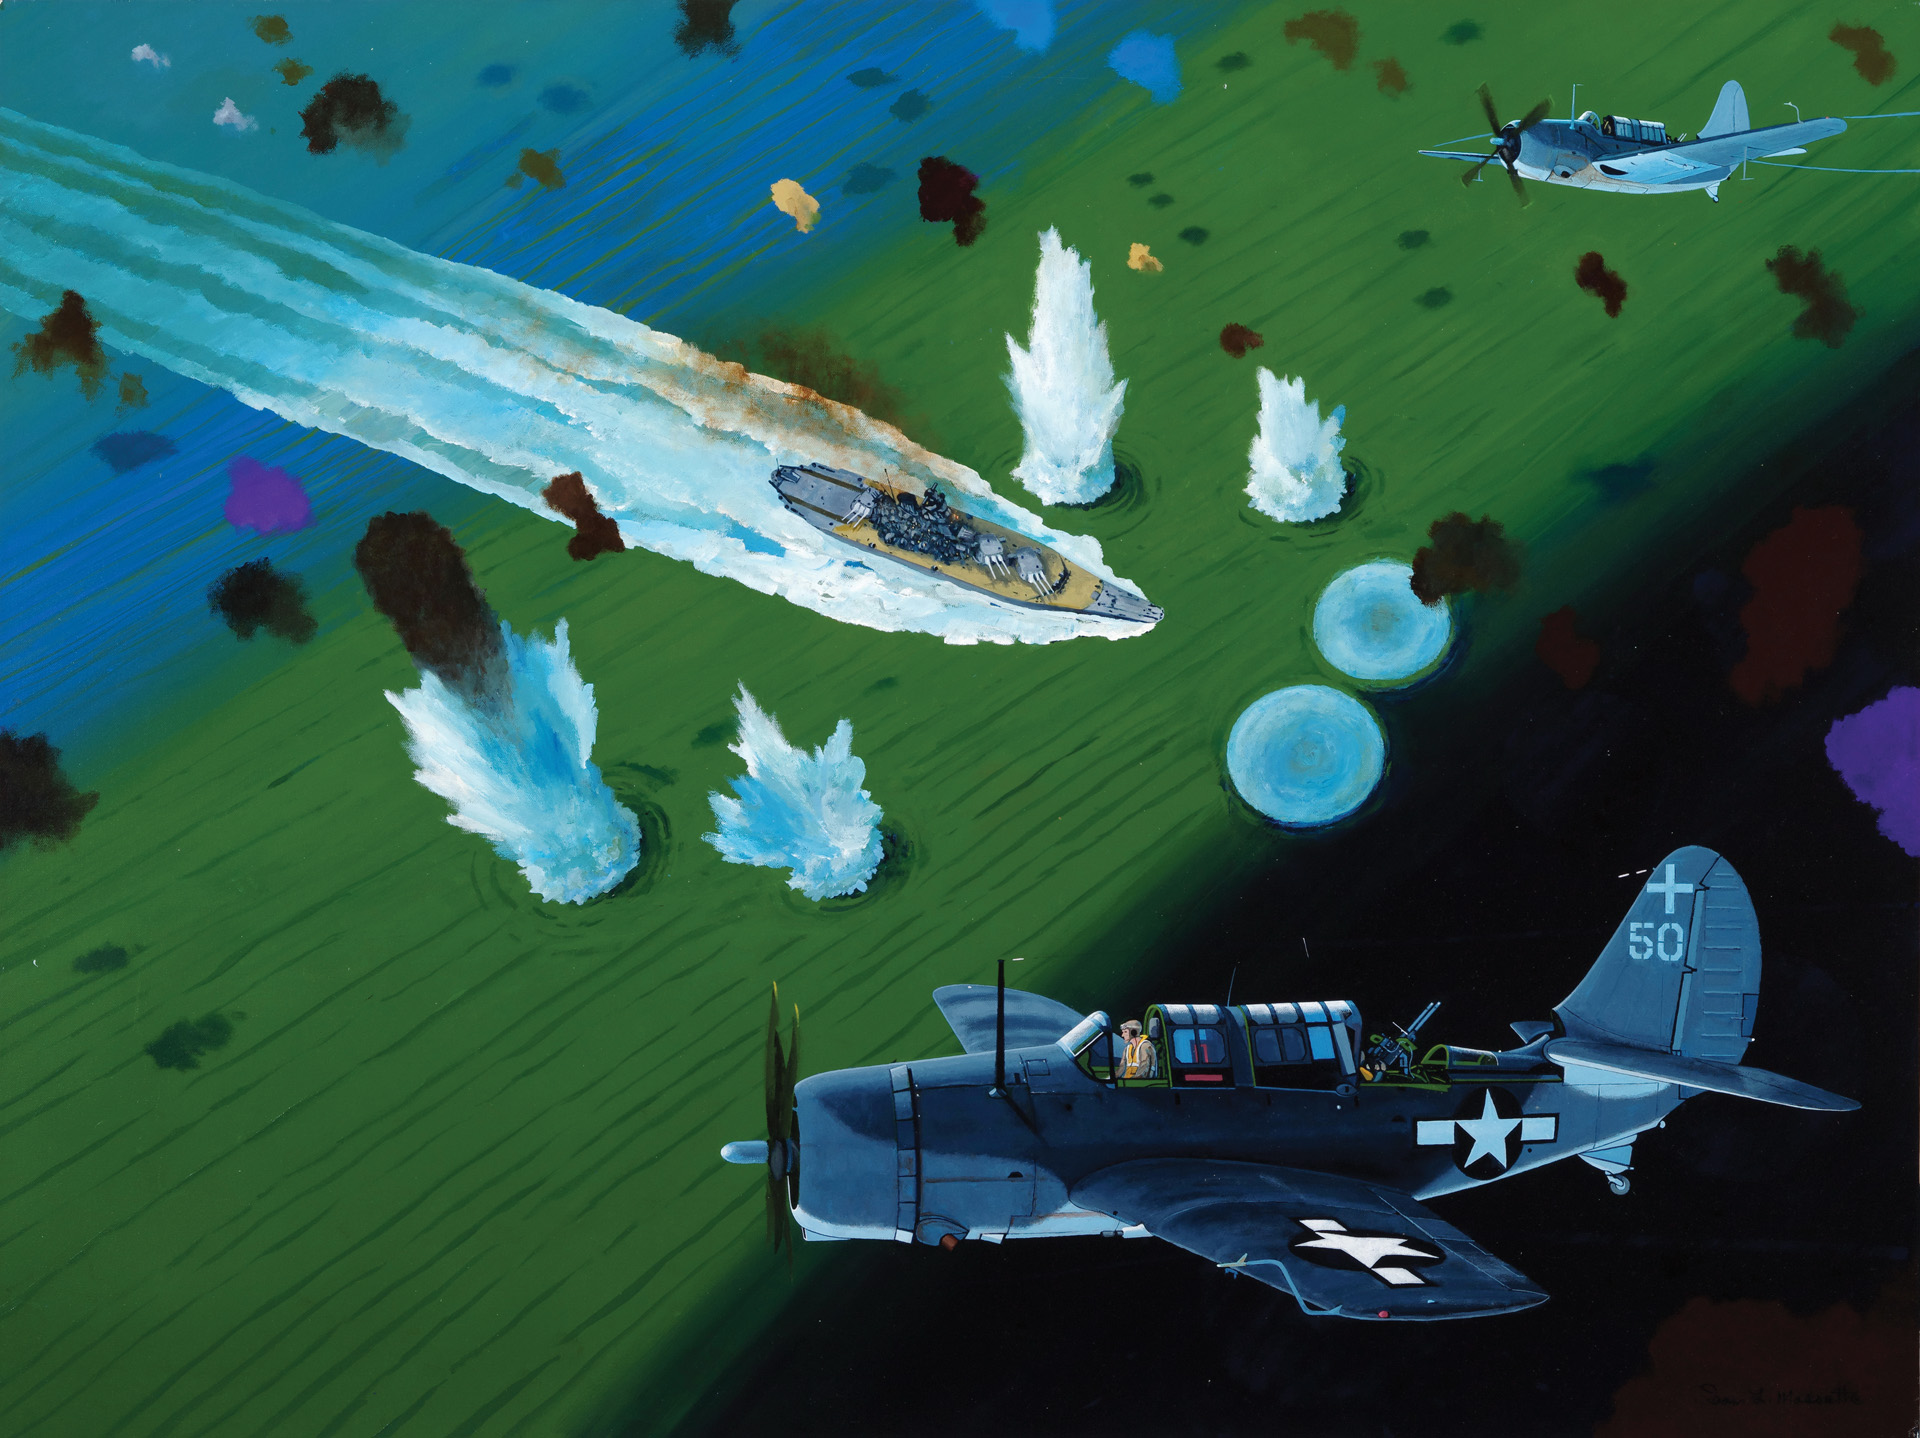 U.S. Navy Helldiver aircraft attack the Japanese battleship Musashi in the Sibuyan Sea during the Battle of Leyte Gulf. Painting by Sam L. Massette.